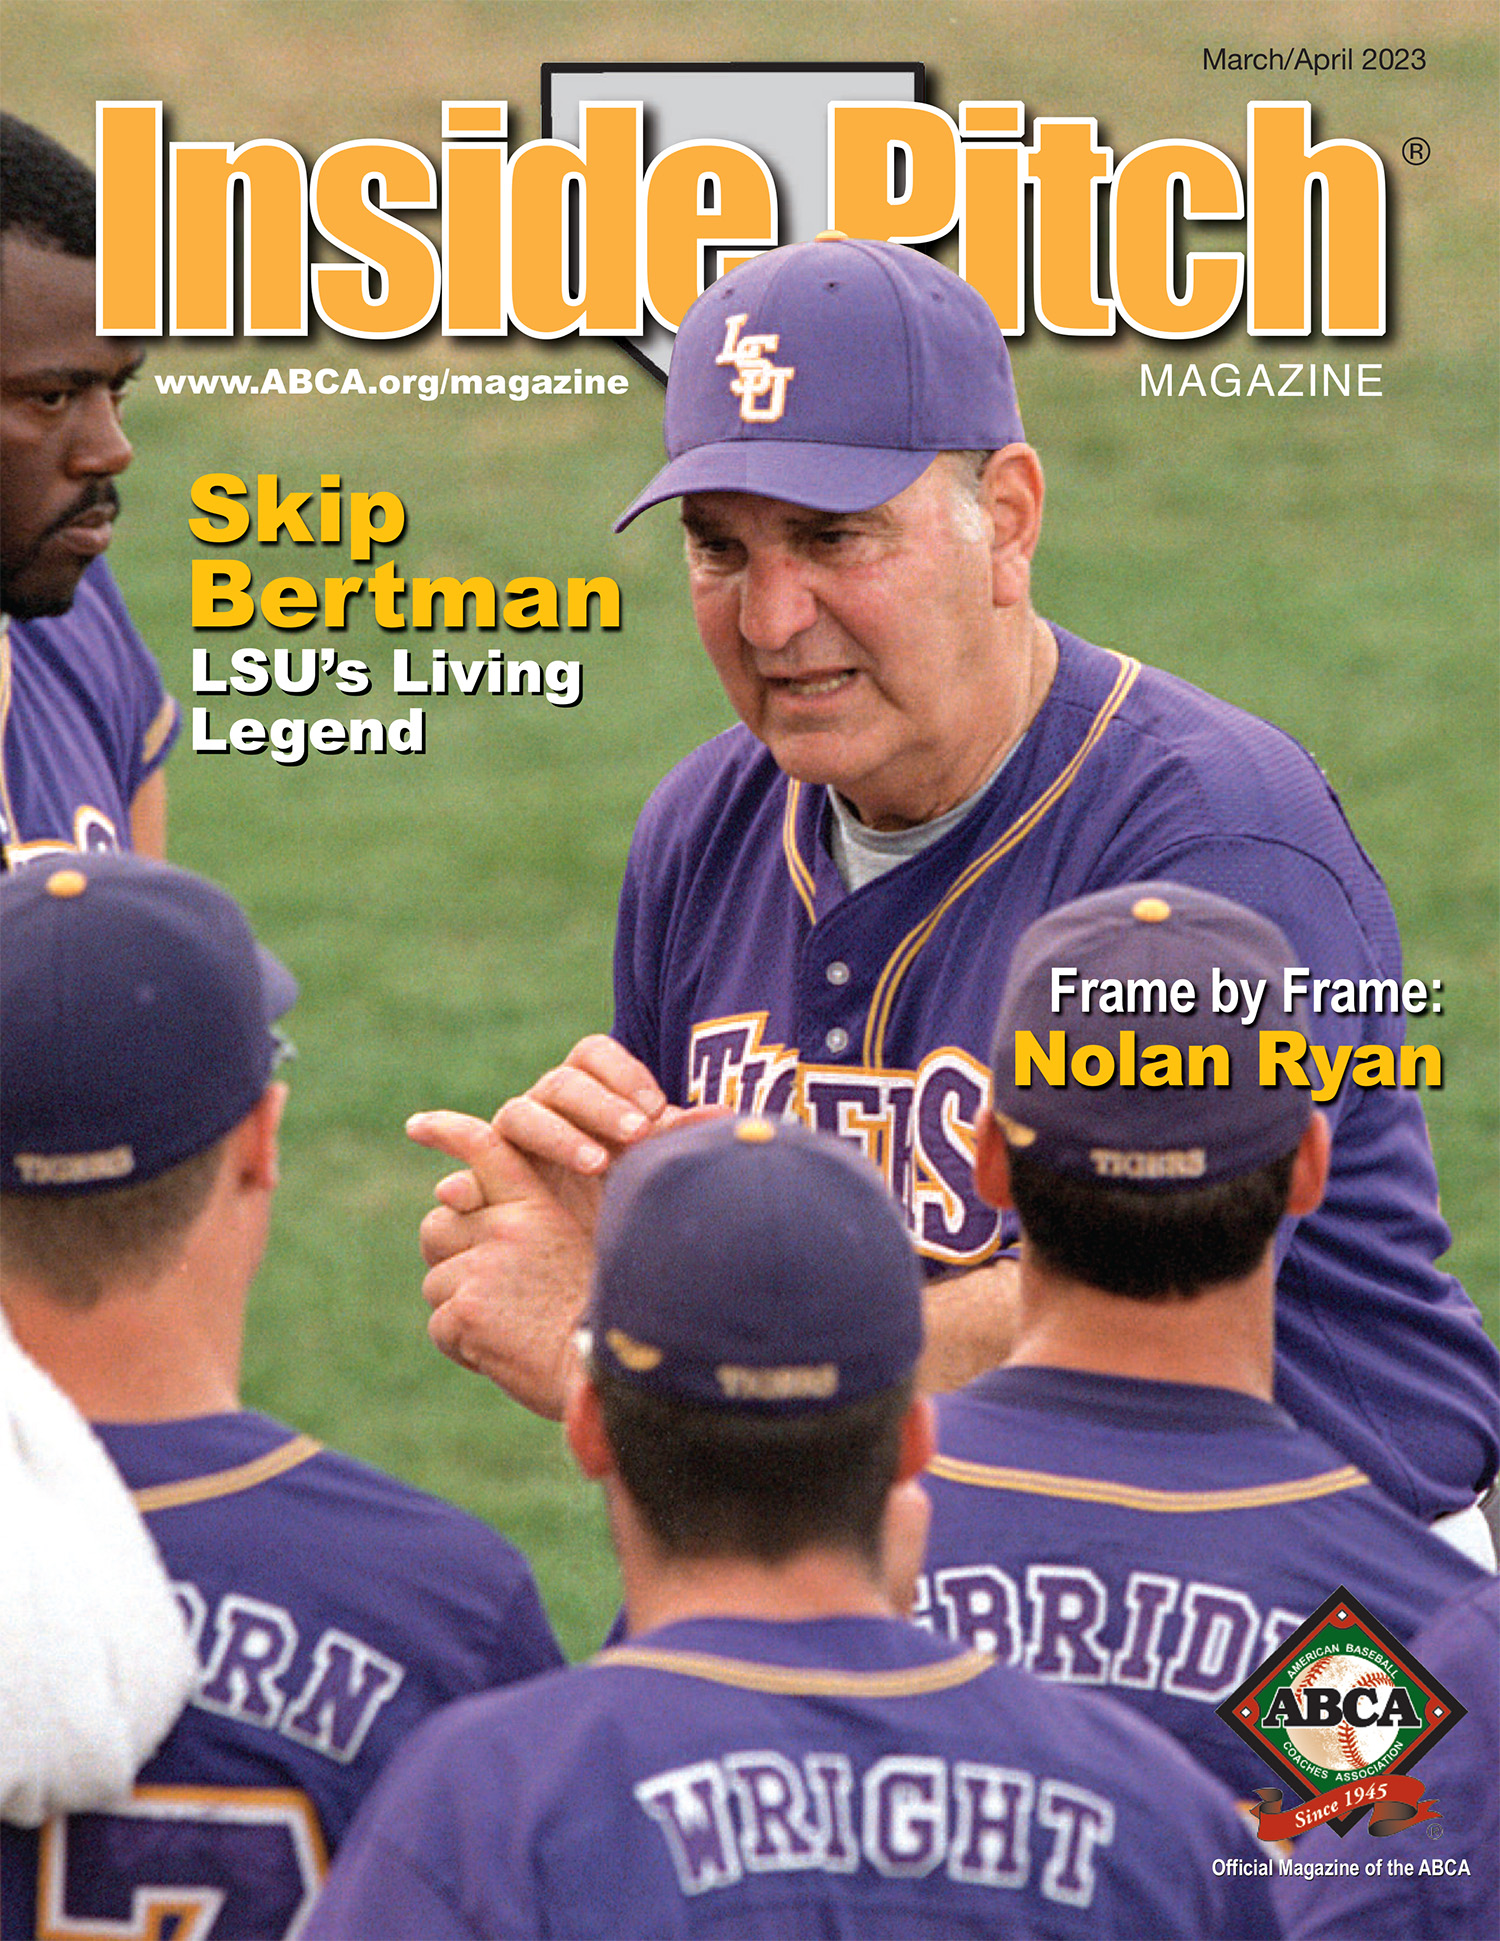 Inside Pitch Magazine Cover with Skip Bertman